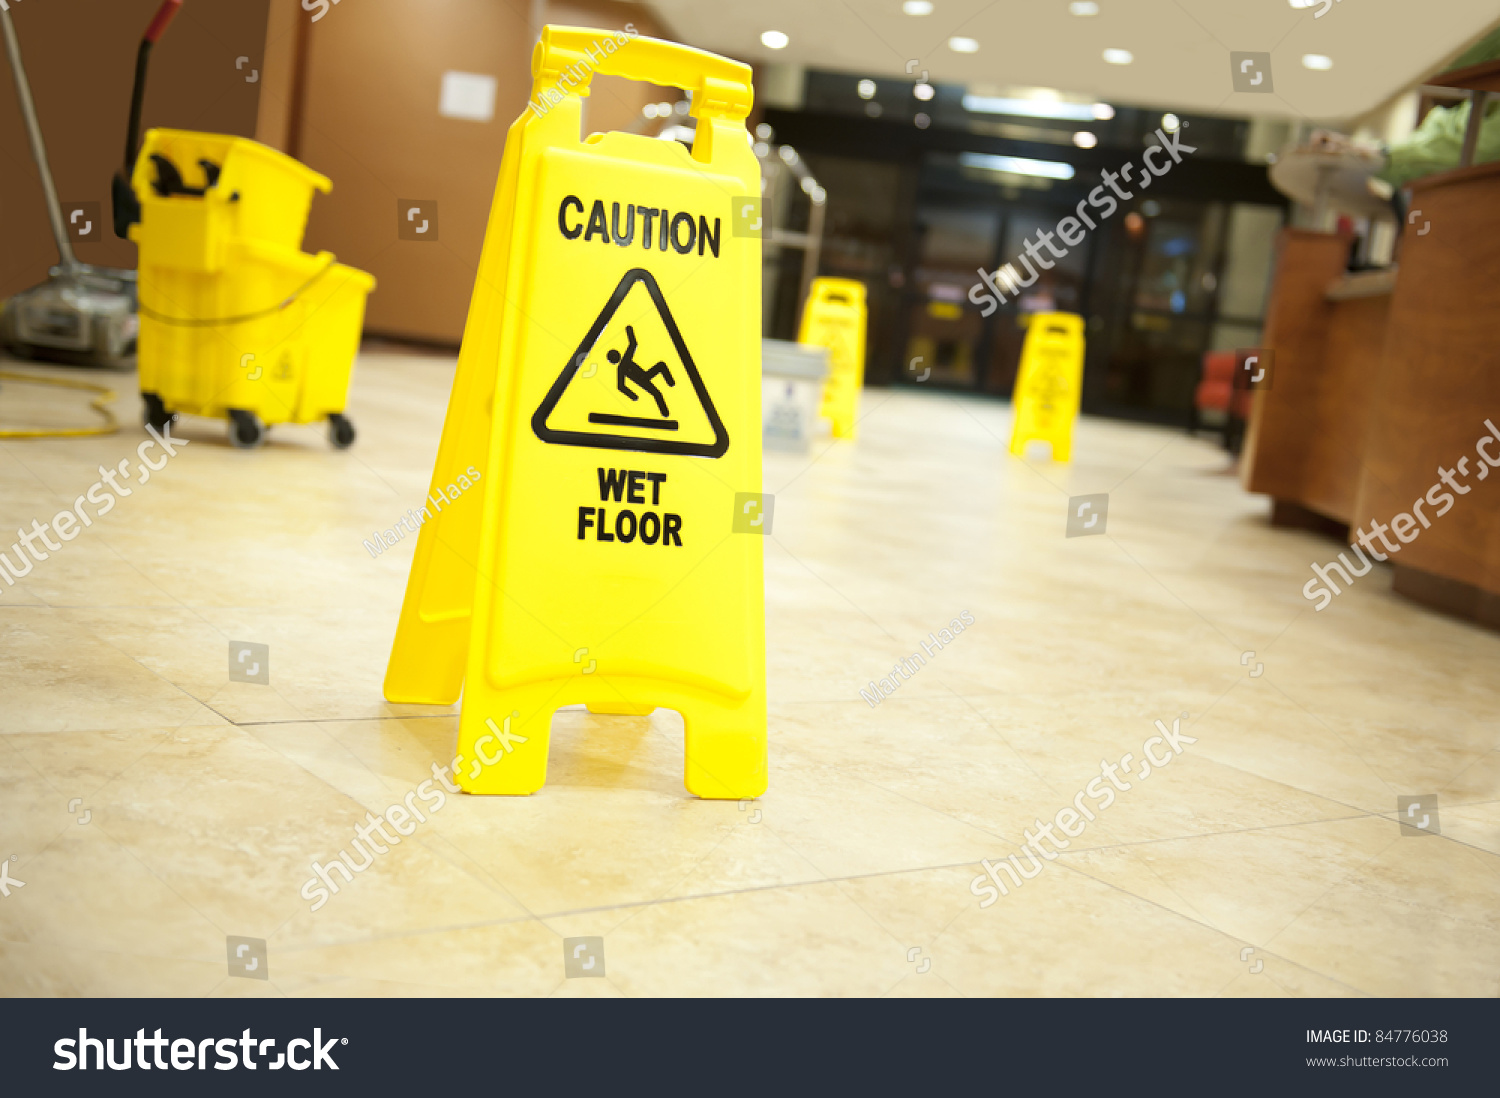 Lobby floor with mop bucket and "caution wet floor" signs, selective focus on nearest sign #84776038